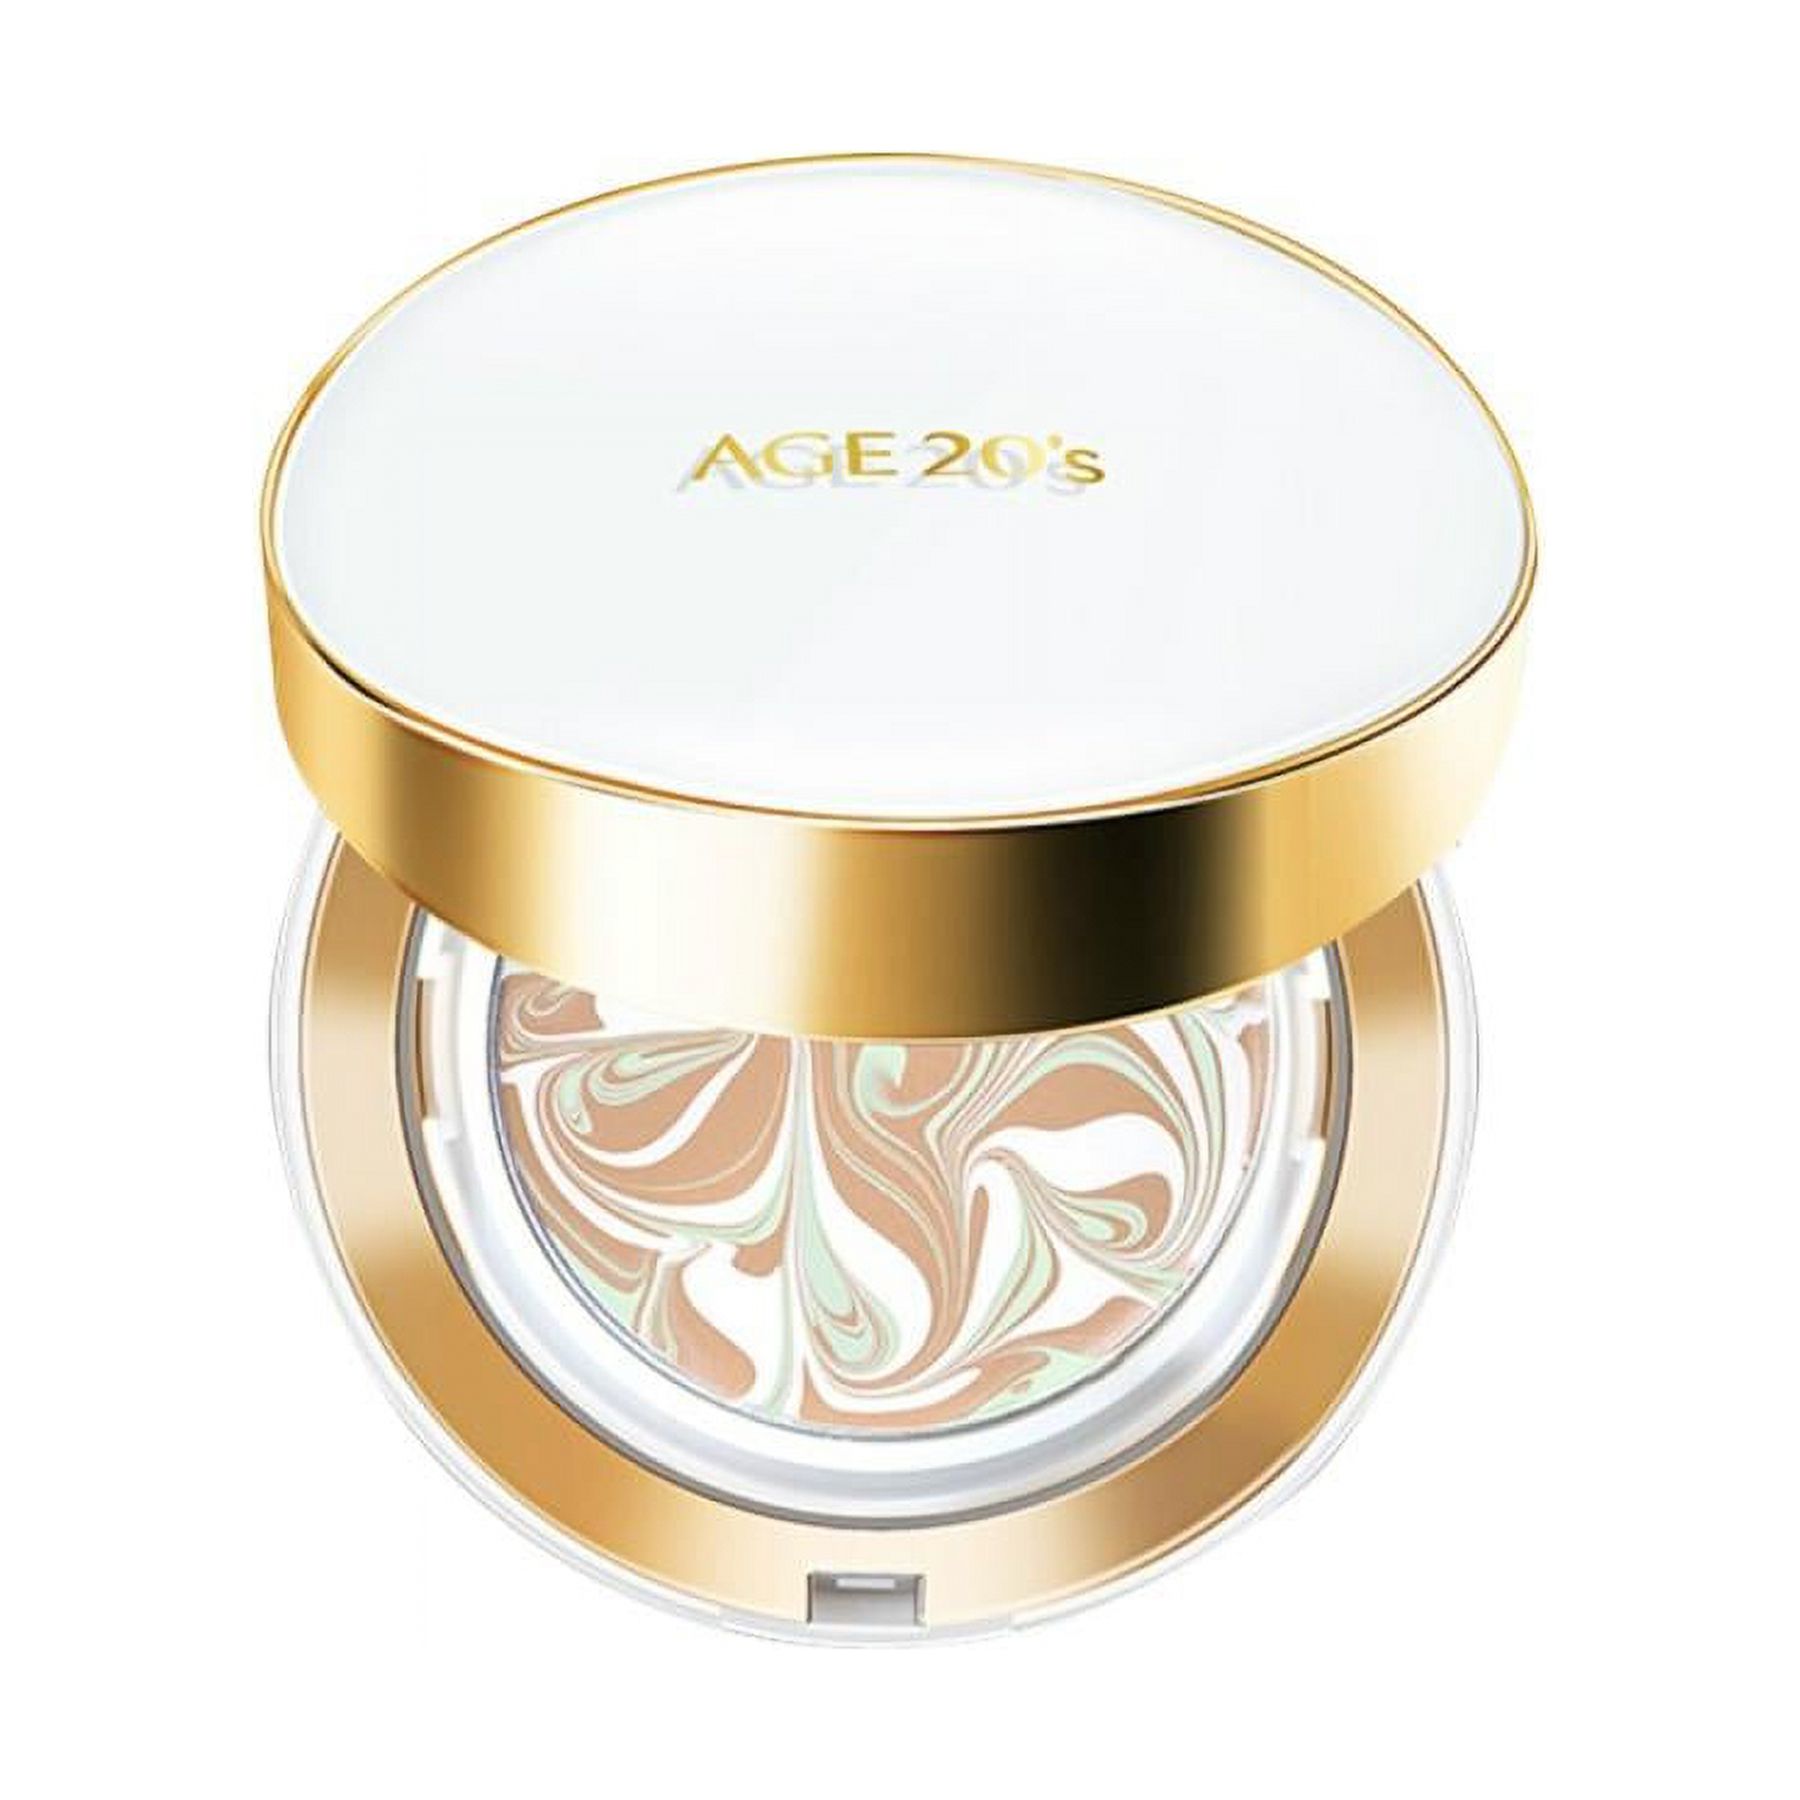 AGE 20'S Signature Essence Cover Pact SPF50+ / PA++++ Long Stay No.23 Medium Beige - image 1 of 2